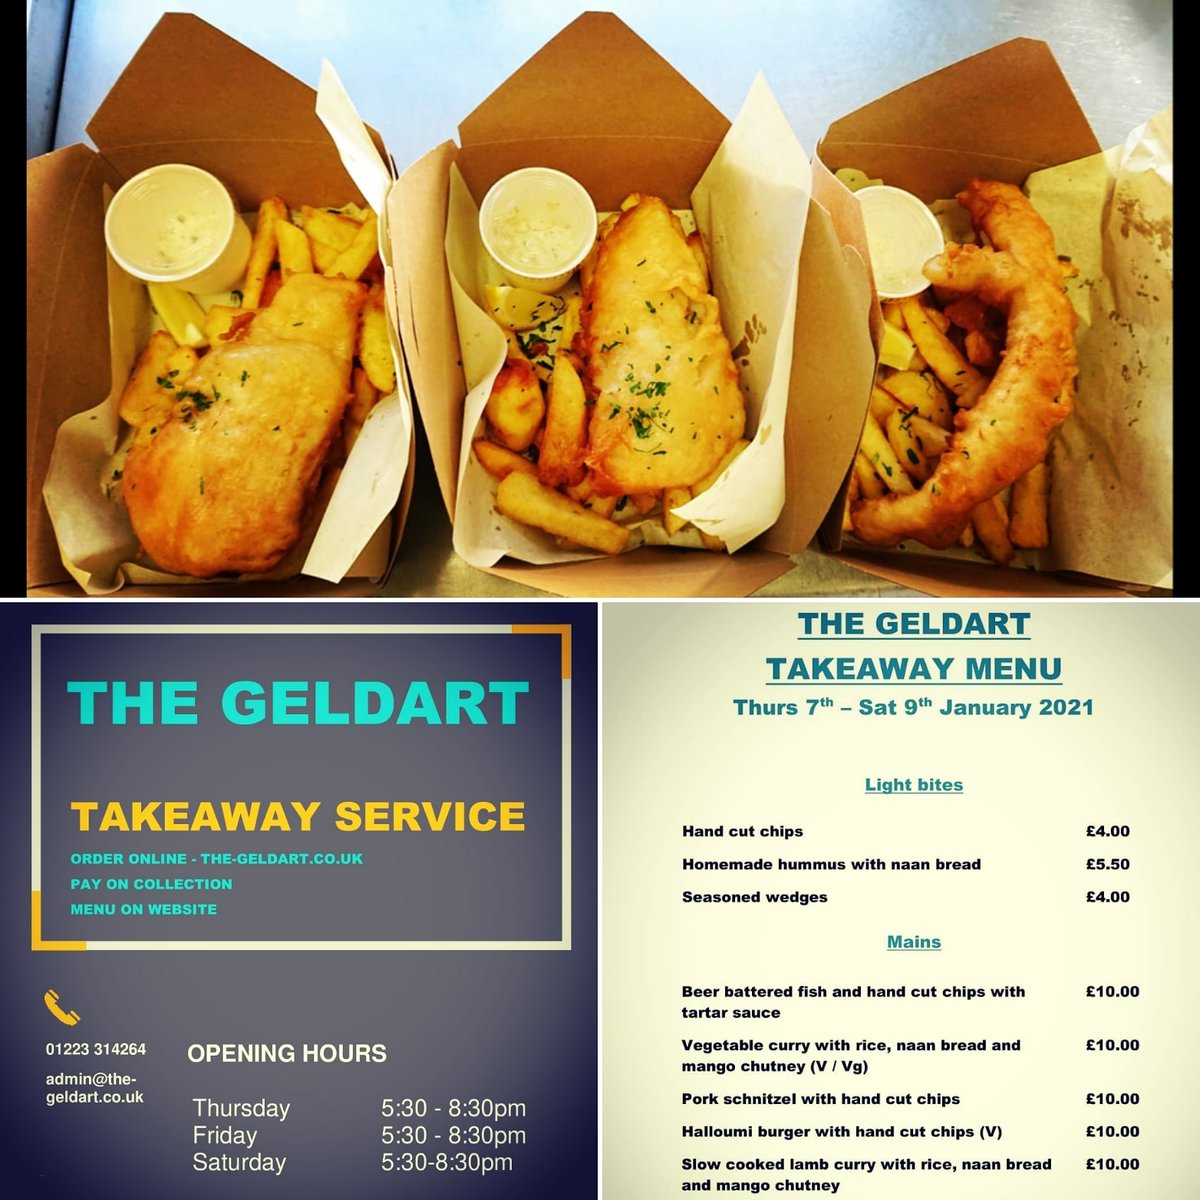 Takeaway food is back! Thursday - Saturday 5:30-8:30pm. Order online for collection #takeawaymenu #fishandchips #orderonline #publife #lockdown2021